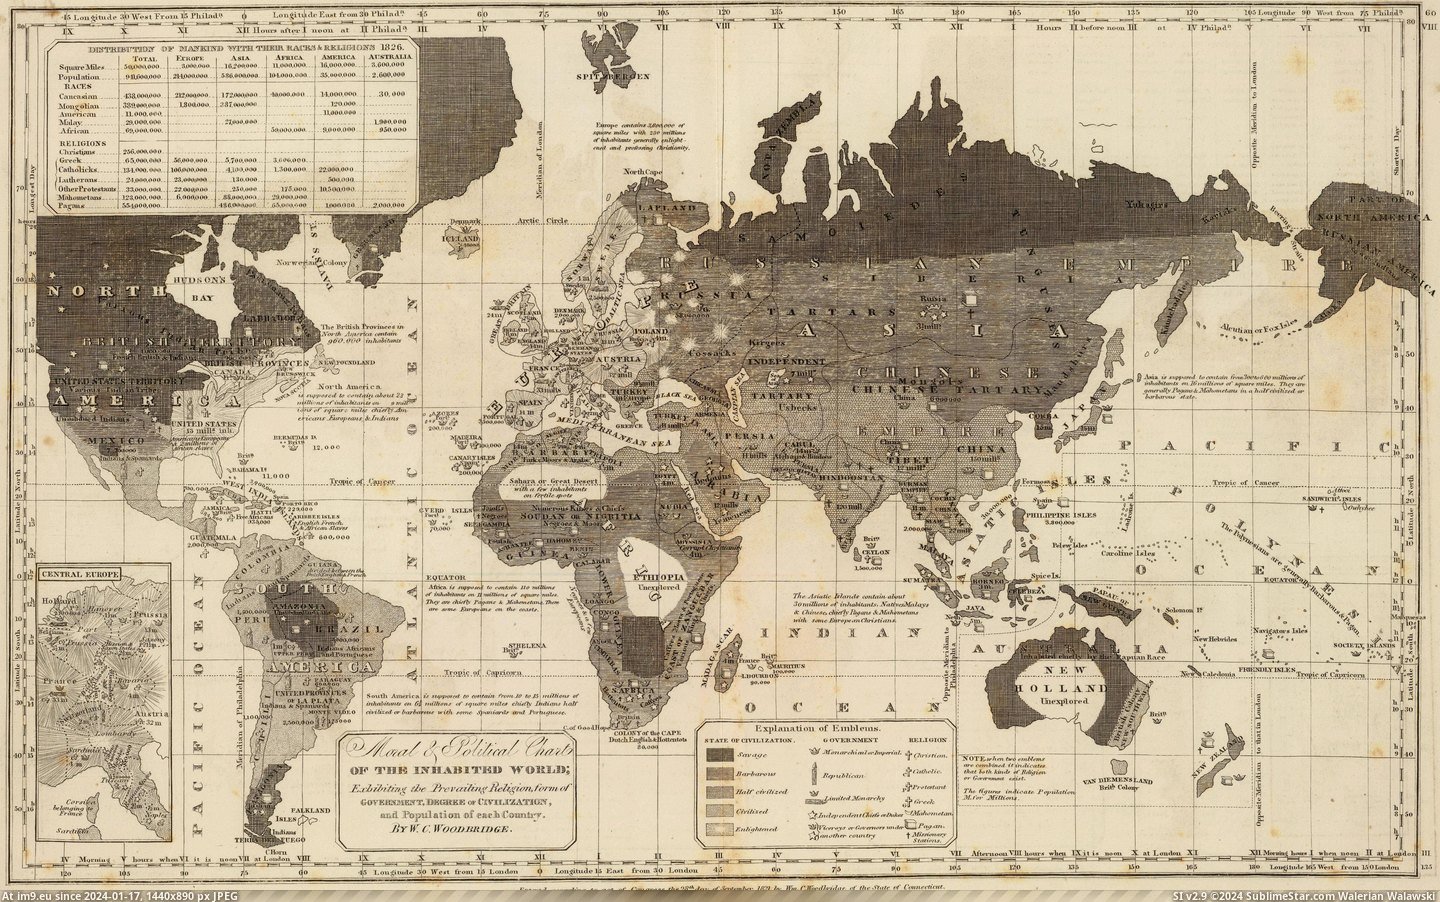 #World #Political #Moral #Chart [Mapporn] [OS] Moral & political chart of the inhabited world (1821)[5609x3479] Pic. (Image of album My r/MAPS favs))